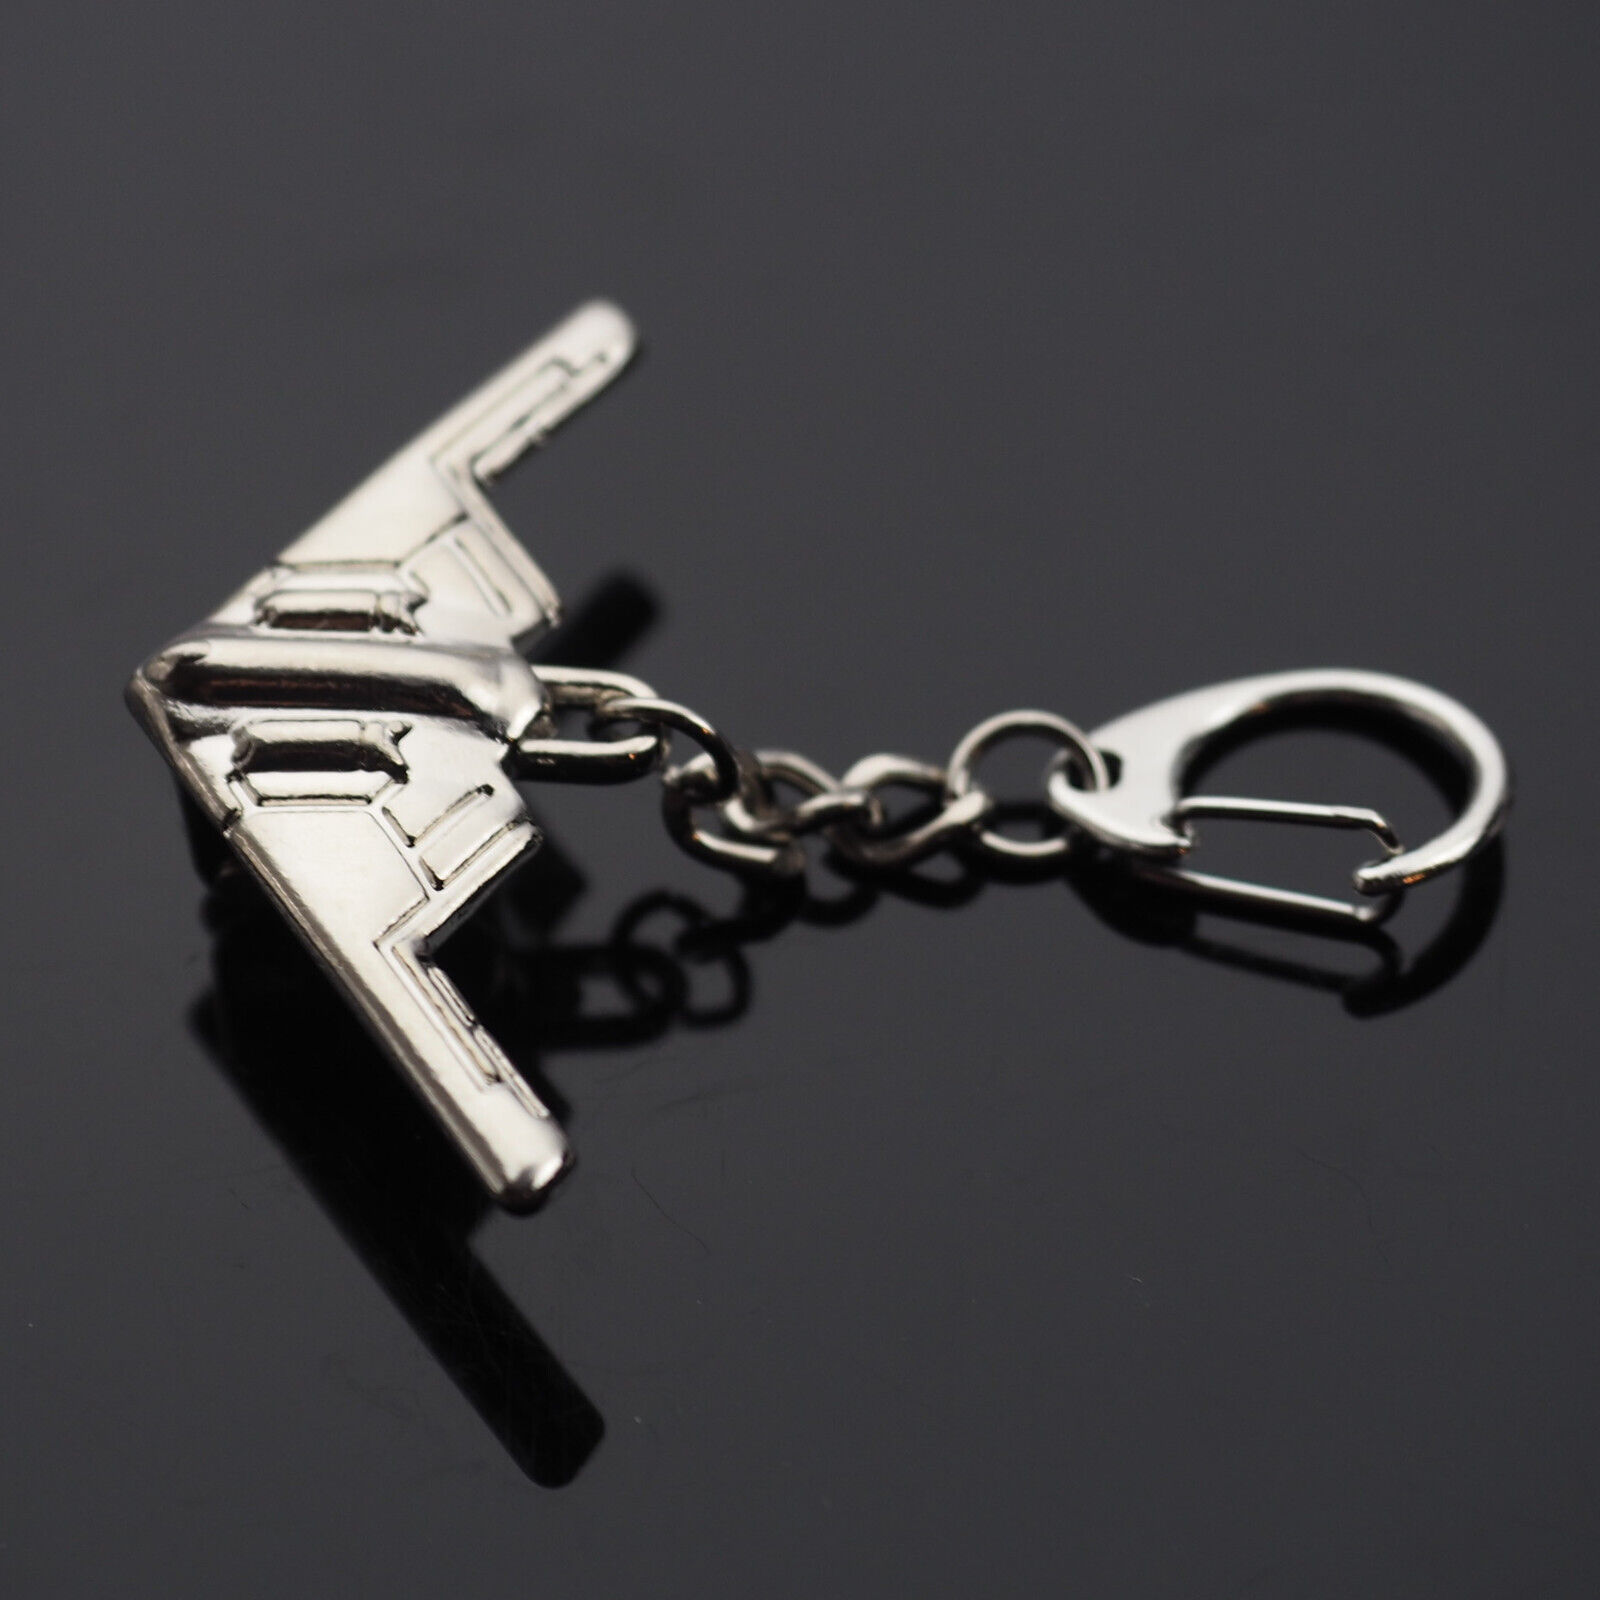 B-2 Stealth Bomber Military Air Force Plane Keychain Clip On Key Ring Cool Gift